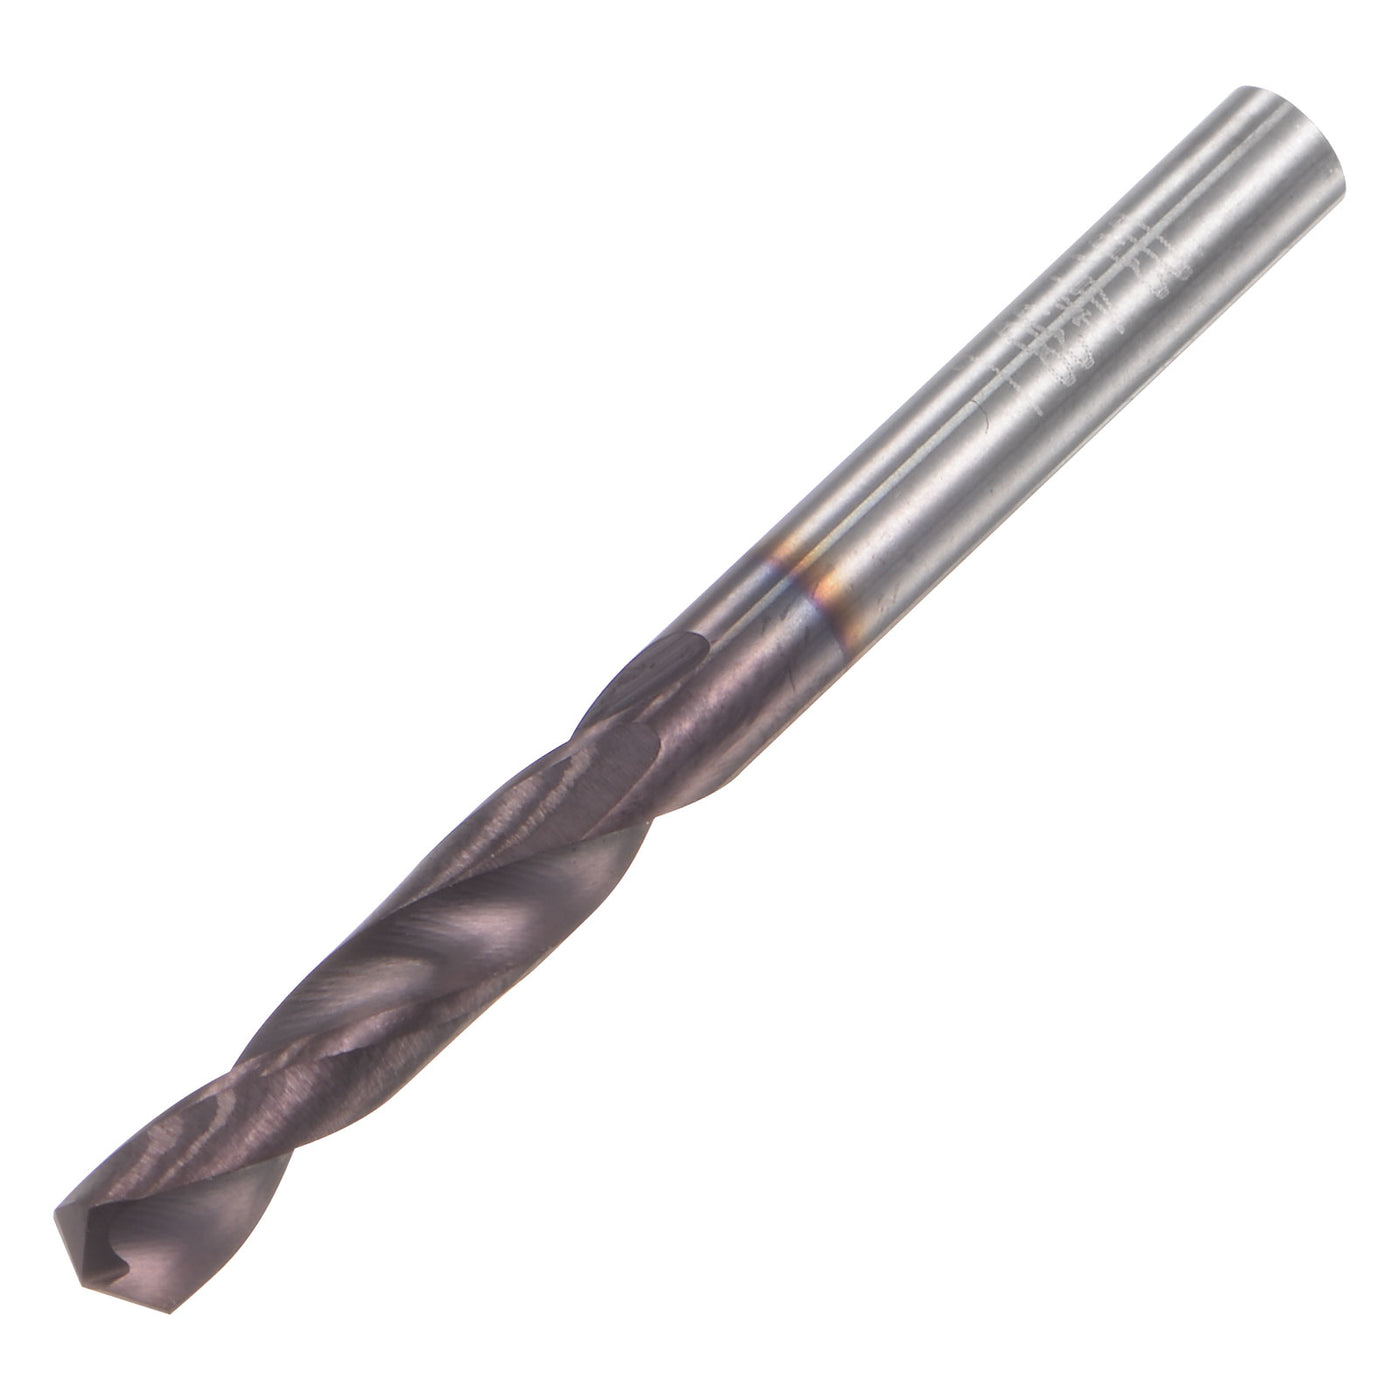 uxcell Uxcell 3.4mm DIN K45 Tungsten Carbide AlTiSin Coated Drill Bit for Stainless Steel